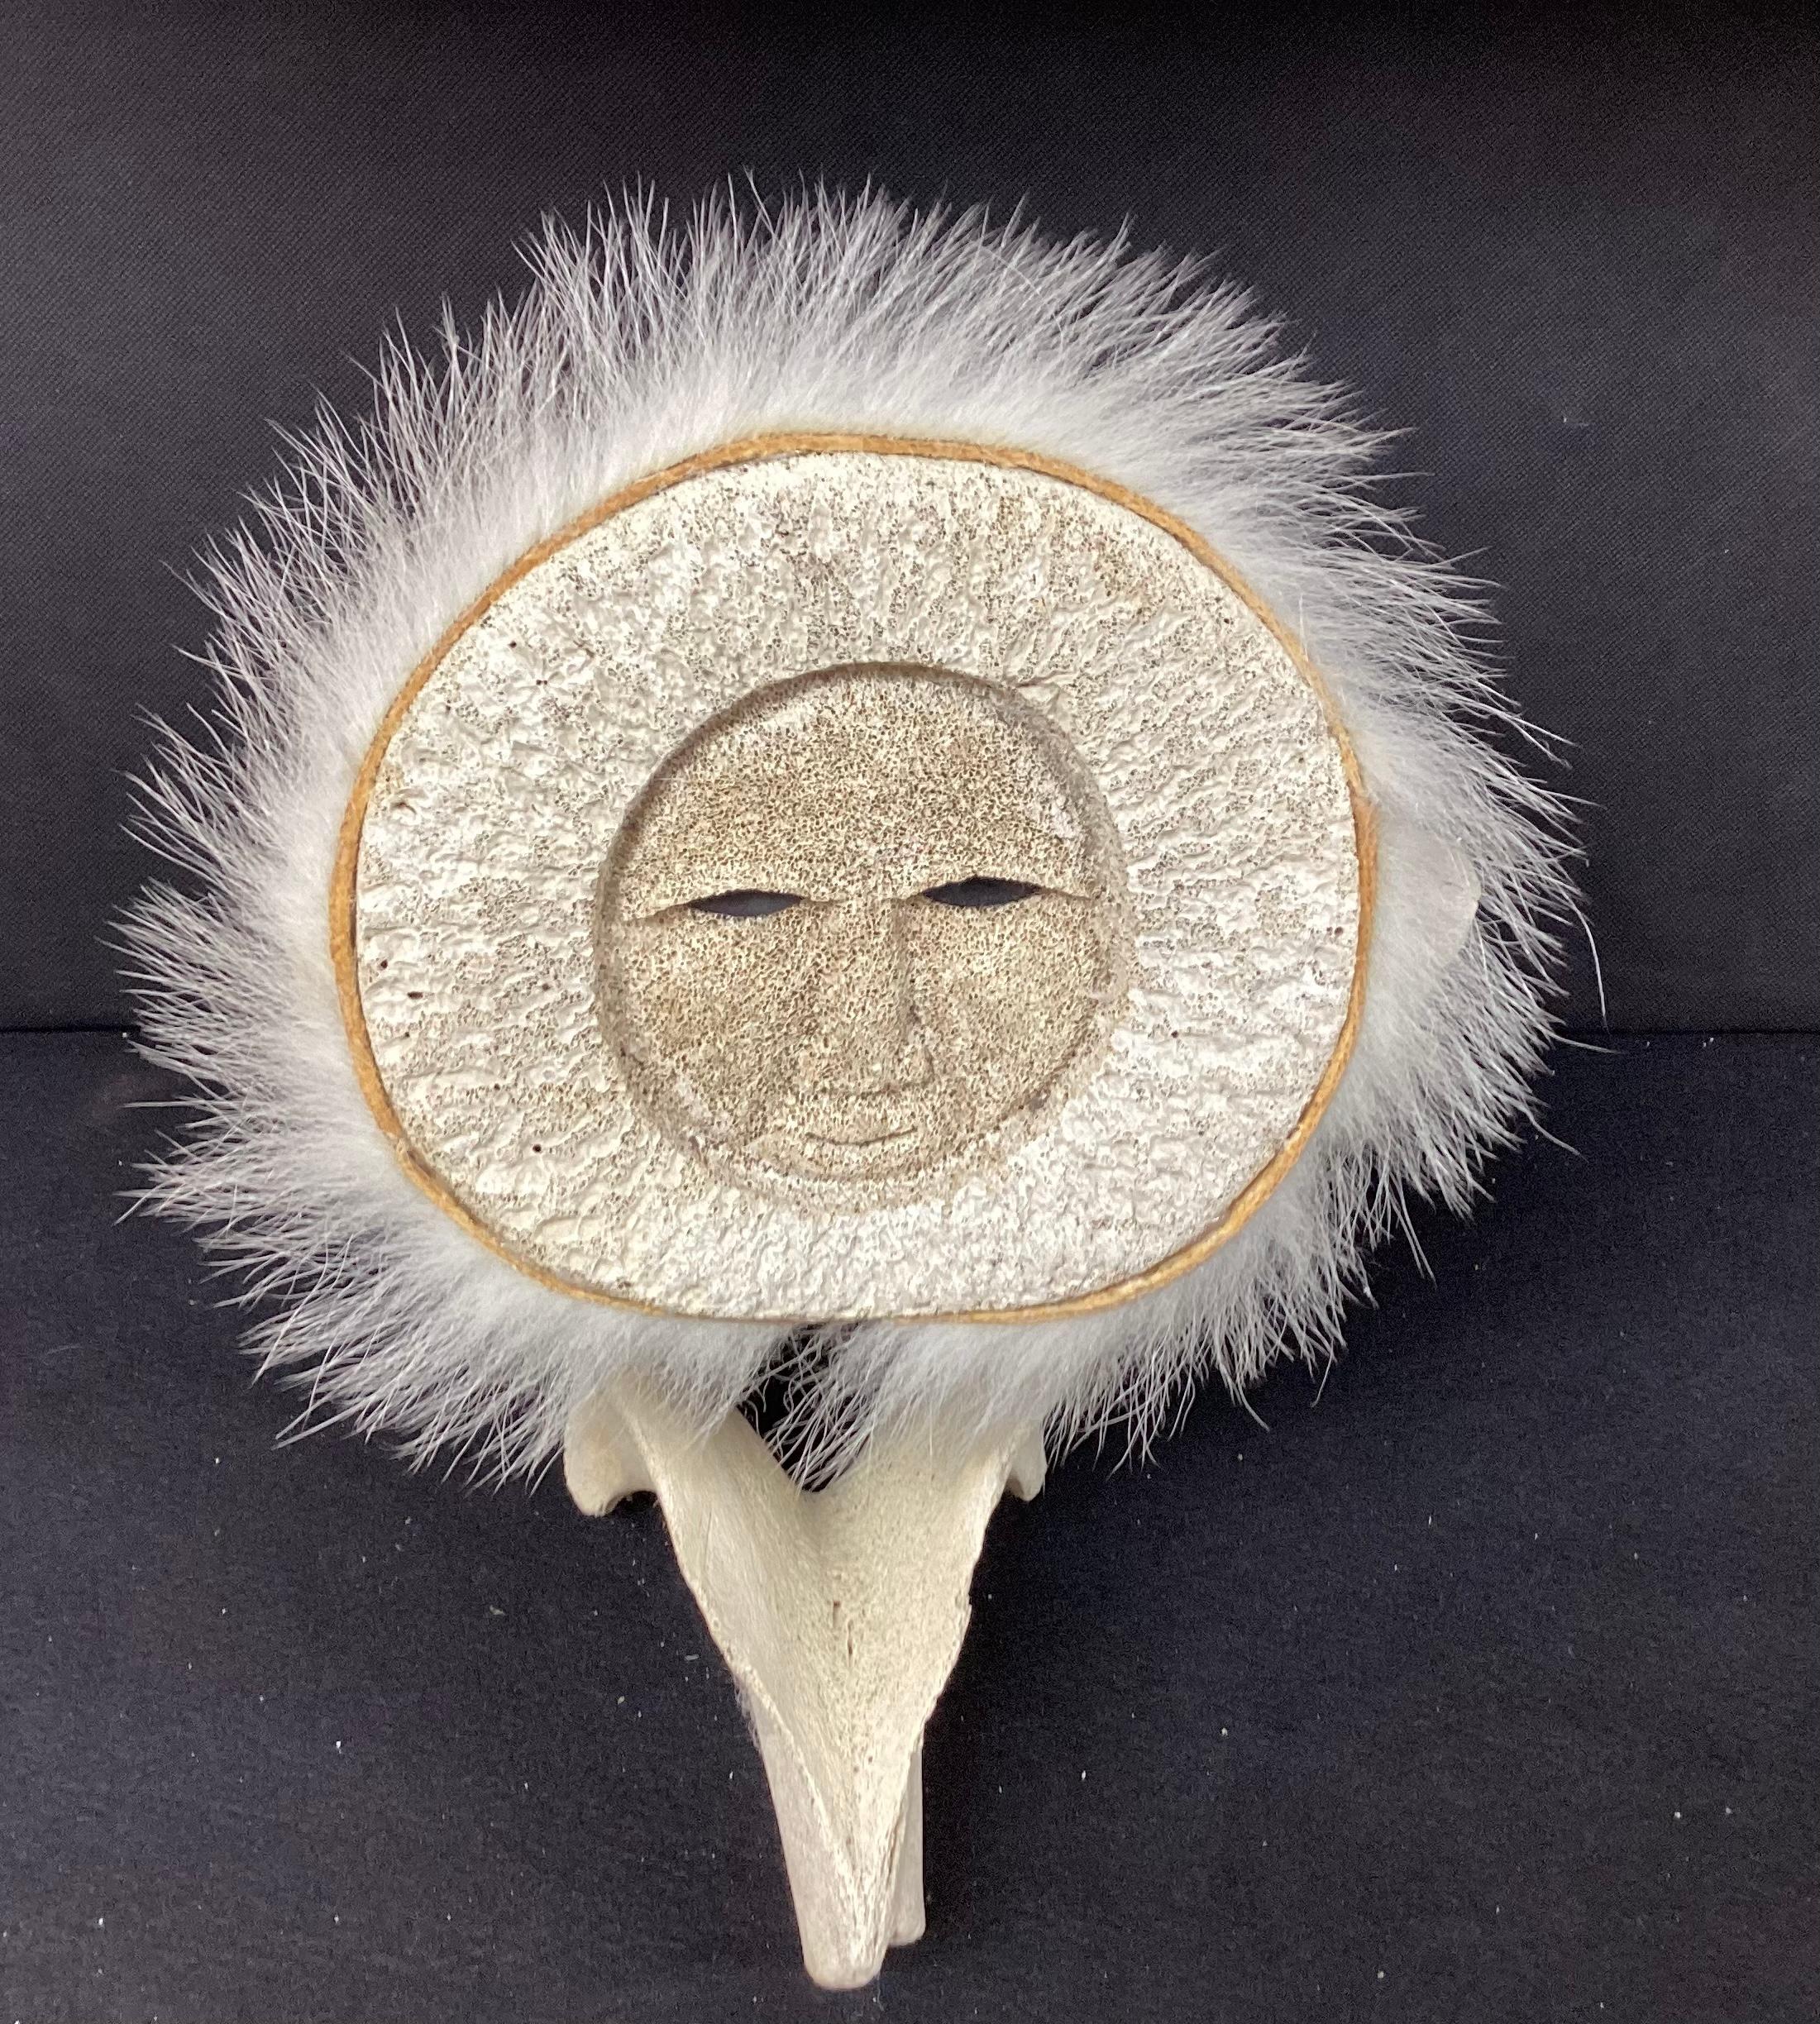 Inuit fossilized whale bone sculpture. Unique whale vertebrae with image of a native Eskimo hunter possibly with polar bear fur covering on head.